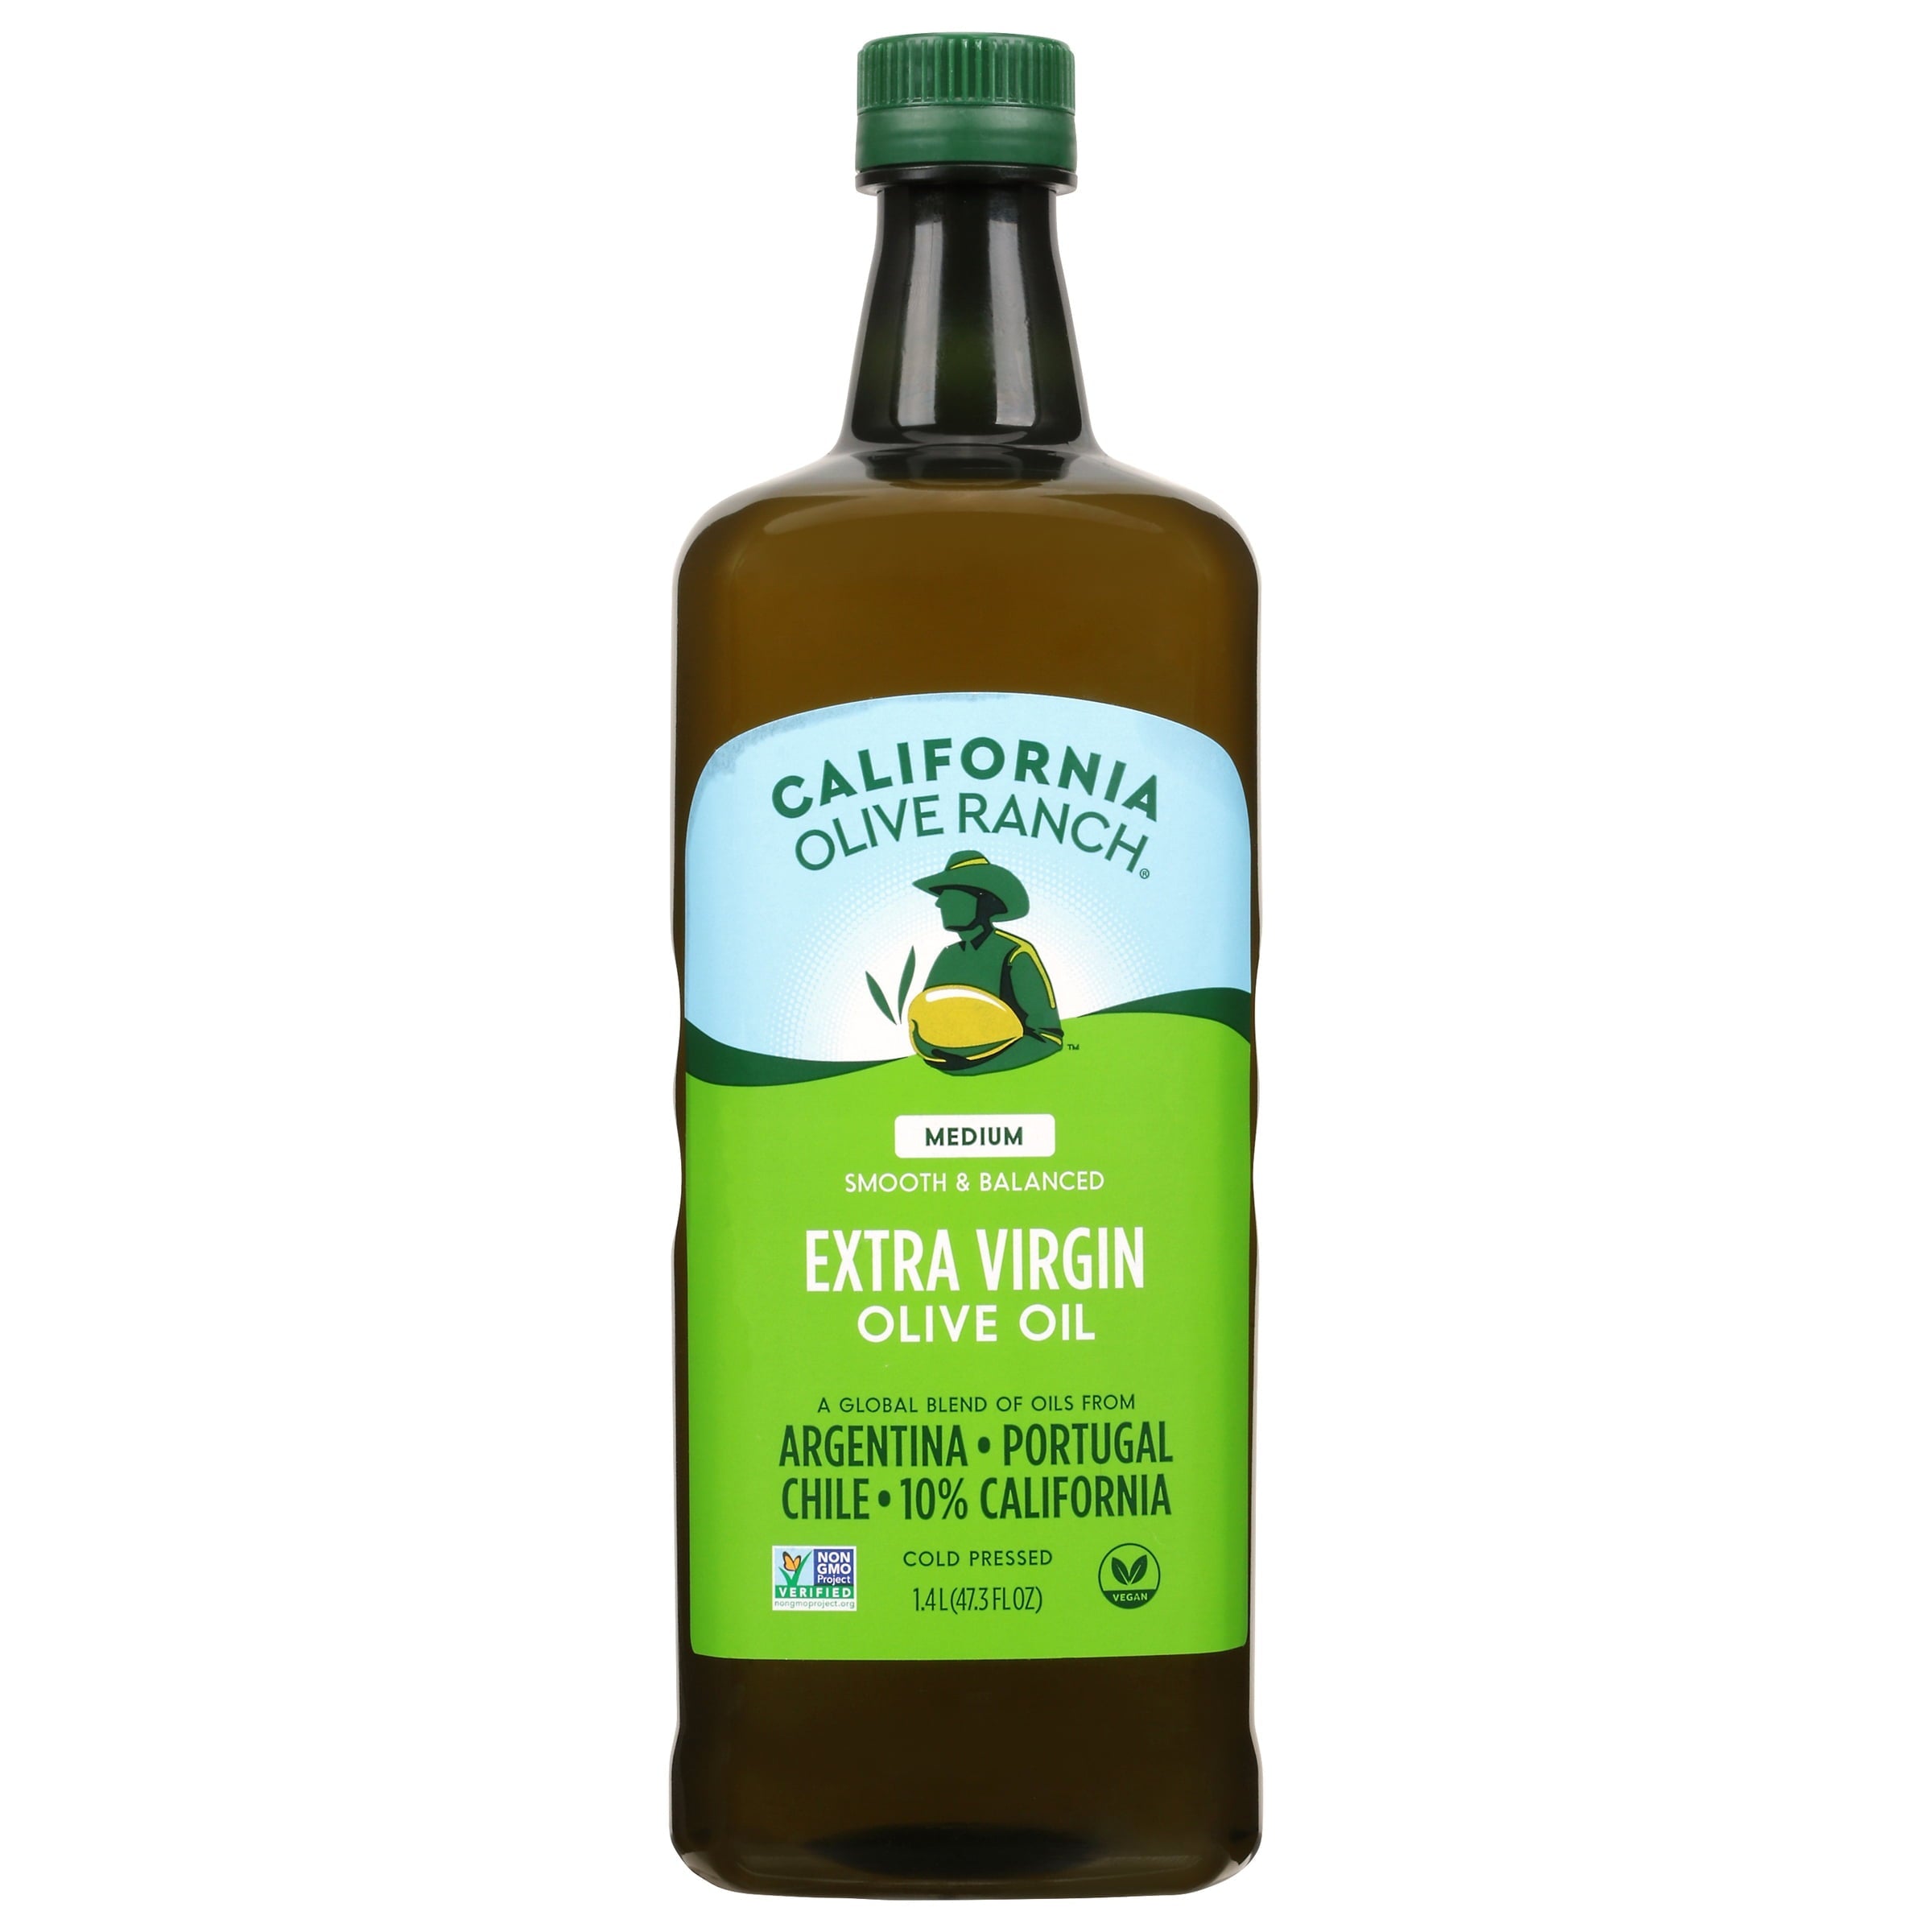 California Olive Ranch Destination Series Everyday Extra Virgin Olive Oil Bottle